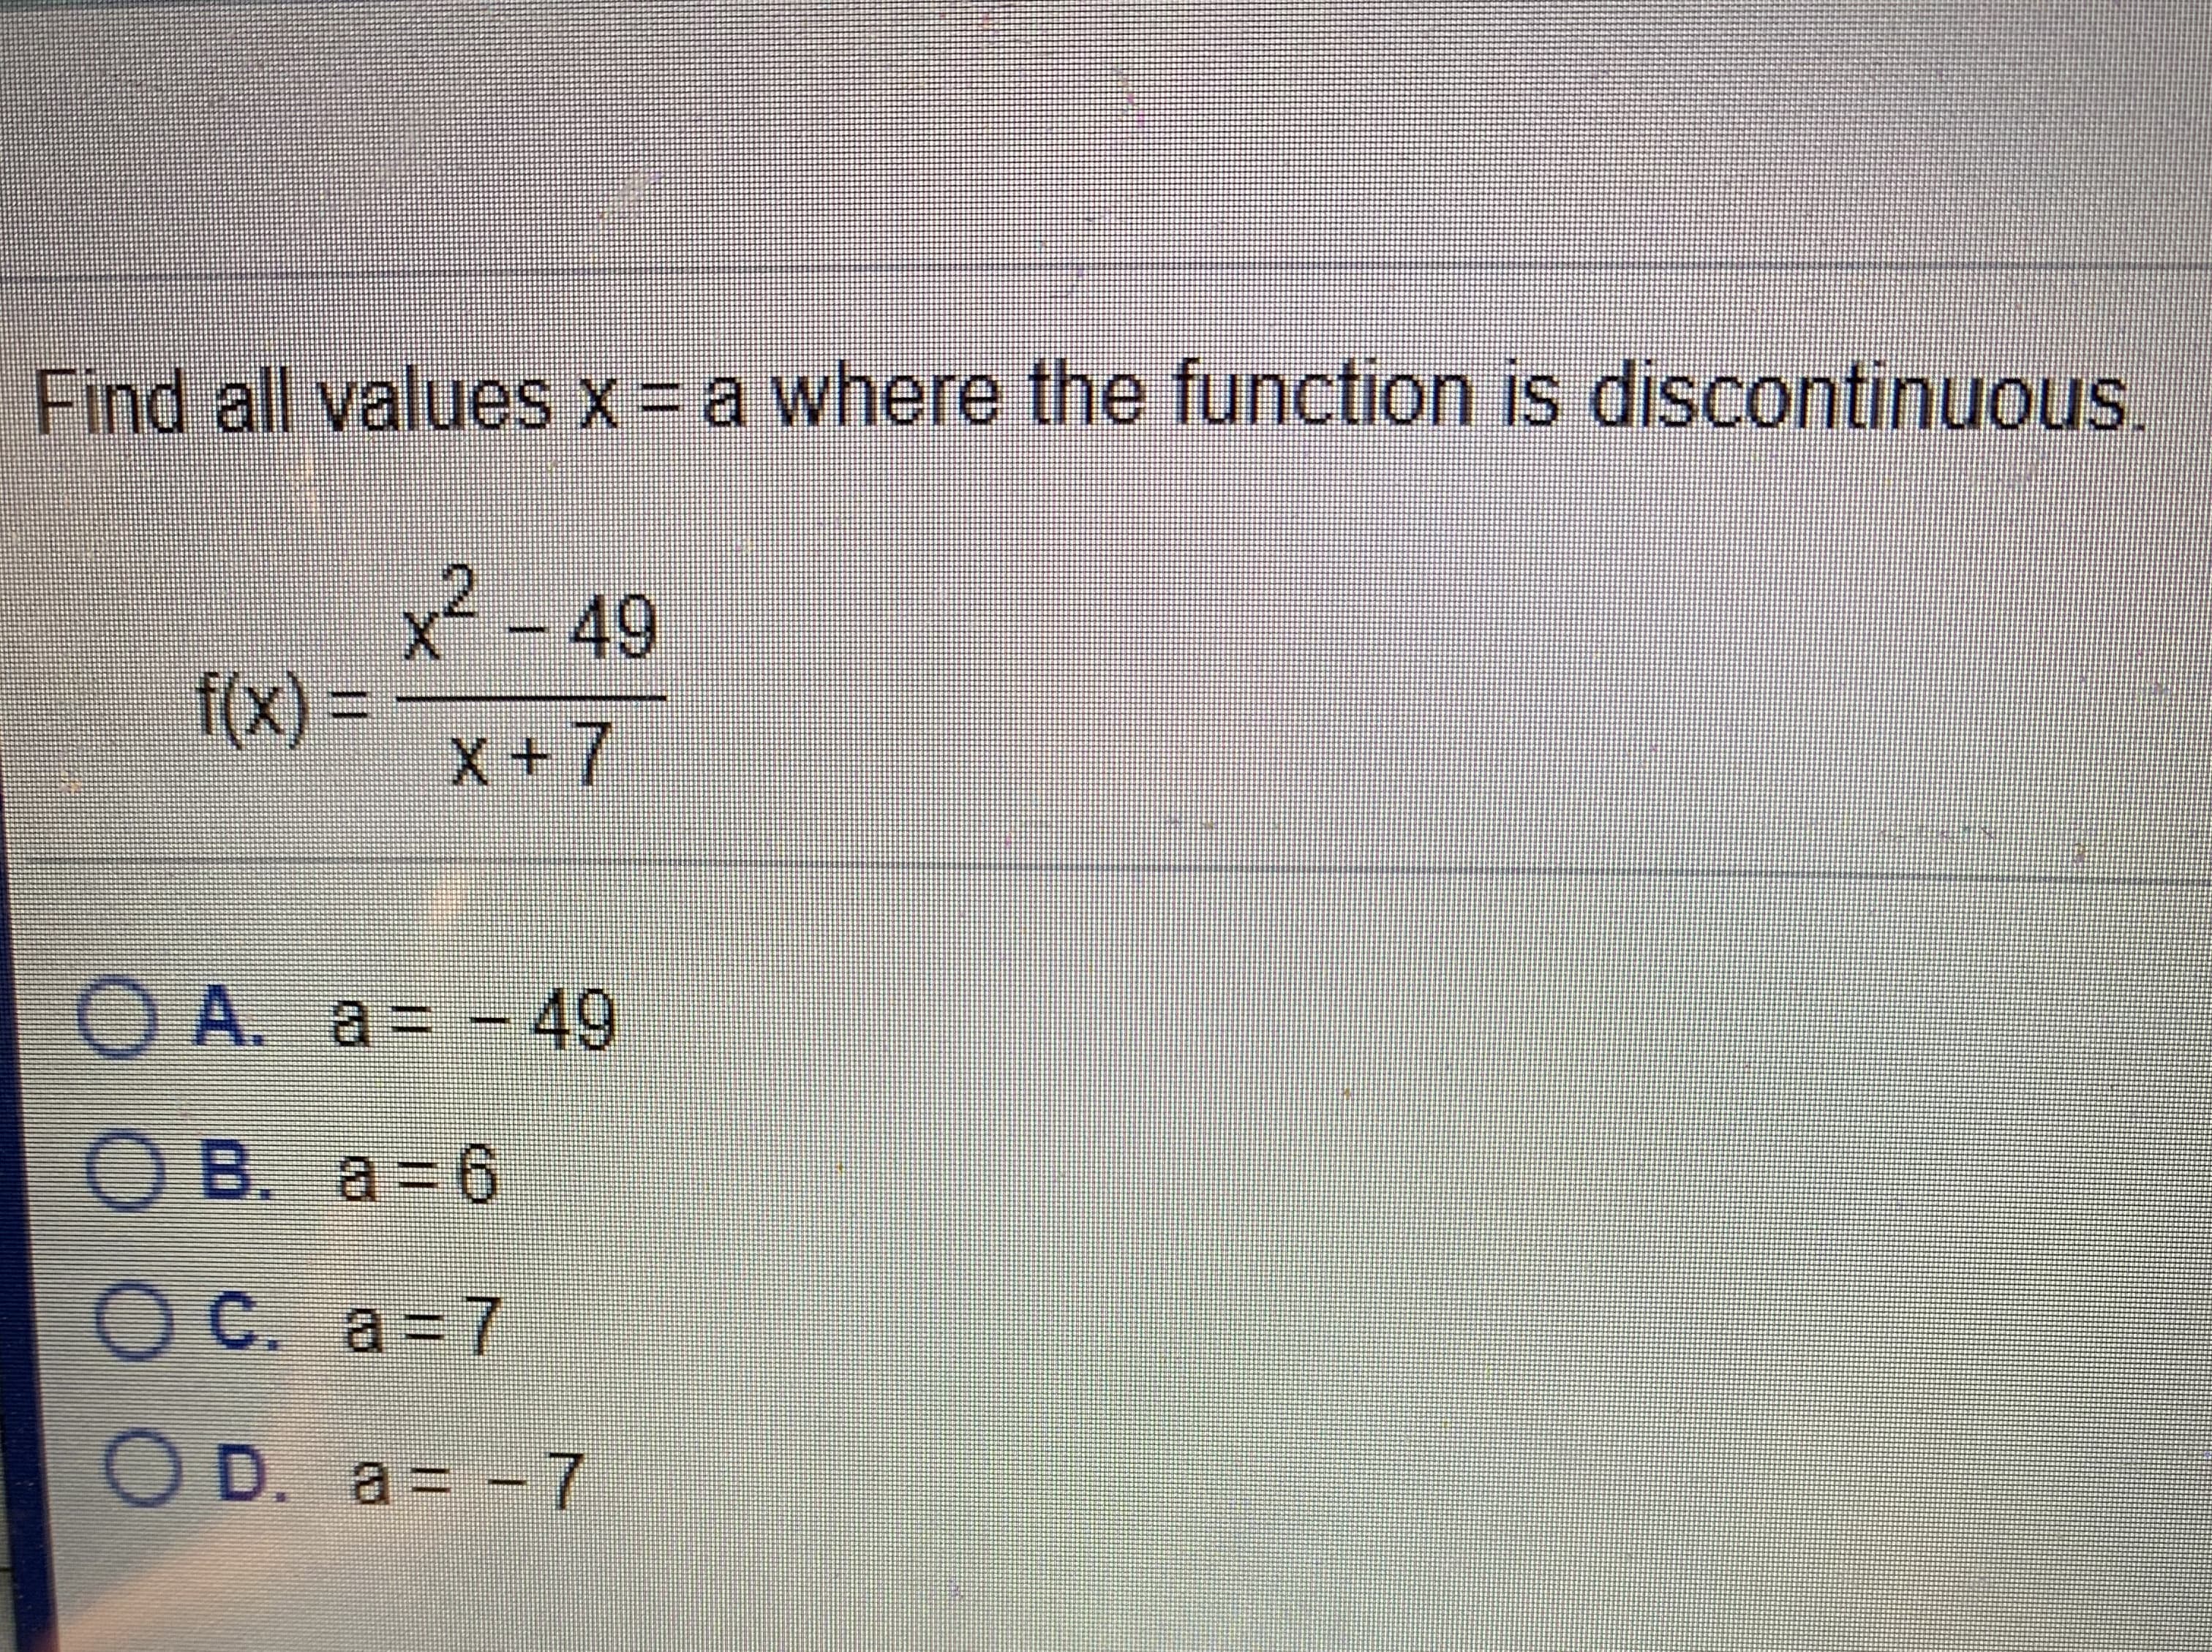 Find all valuesx= a where the function is discontinuous.
2-49
f(x)
=
X+7
O A. a= -
49
O B. a 6
OC. a=7
O D. a
= -7
